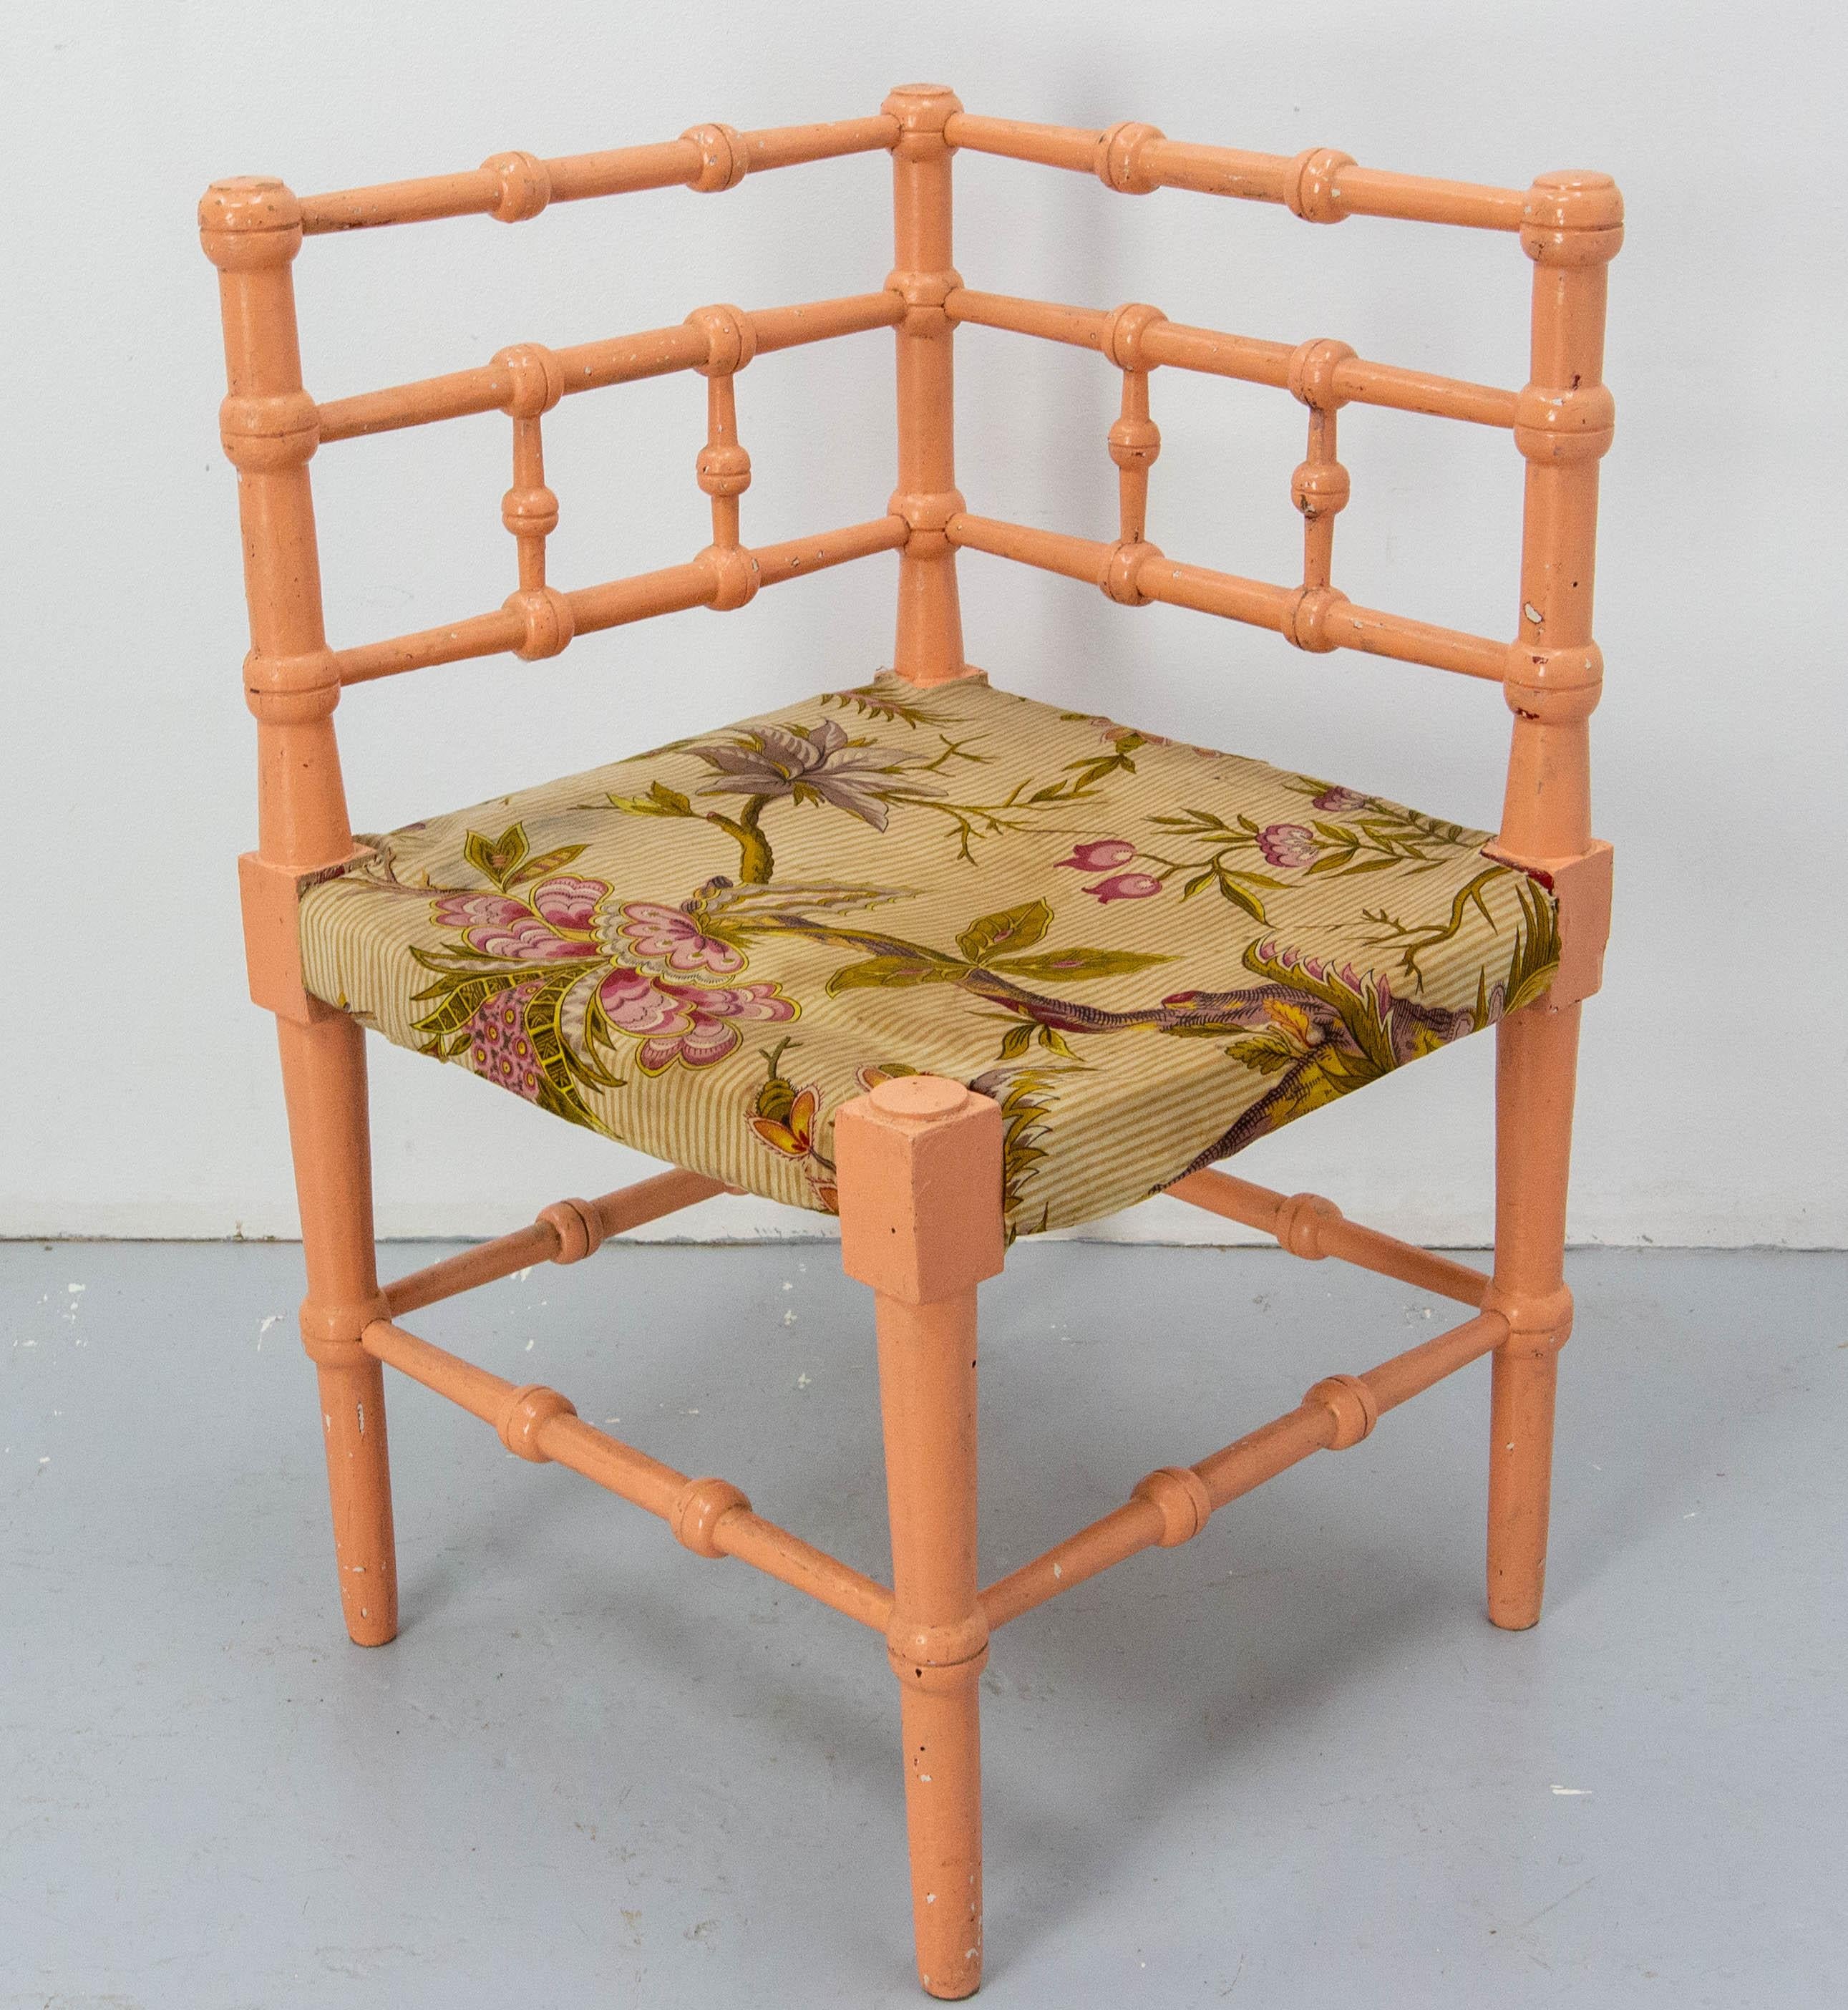 French corner chair for child, made with turned wood.
This can be a charming element in a room decoration. The fabric needs to be changed.
Solid and sound

Shipping:
43 / 43 / 66 cm 4.4 kg
    